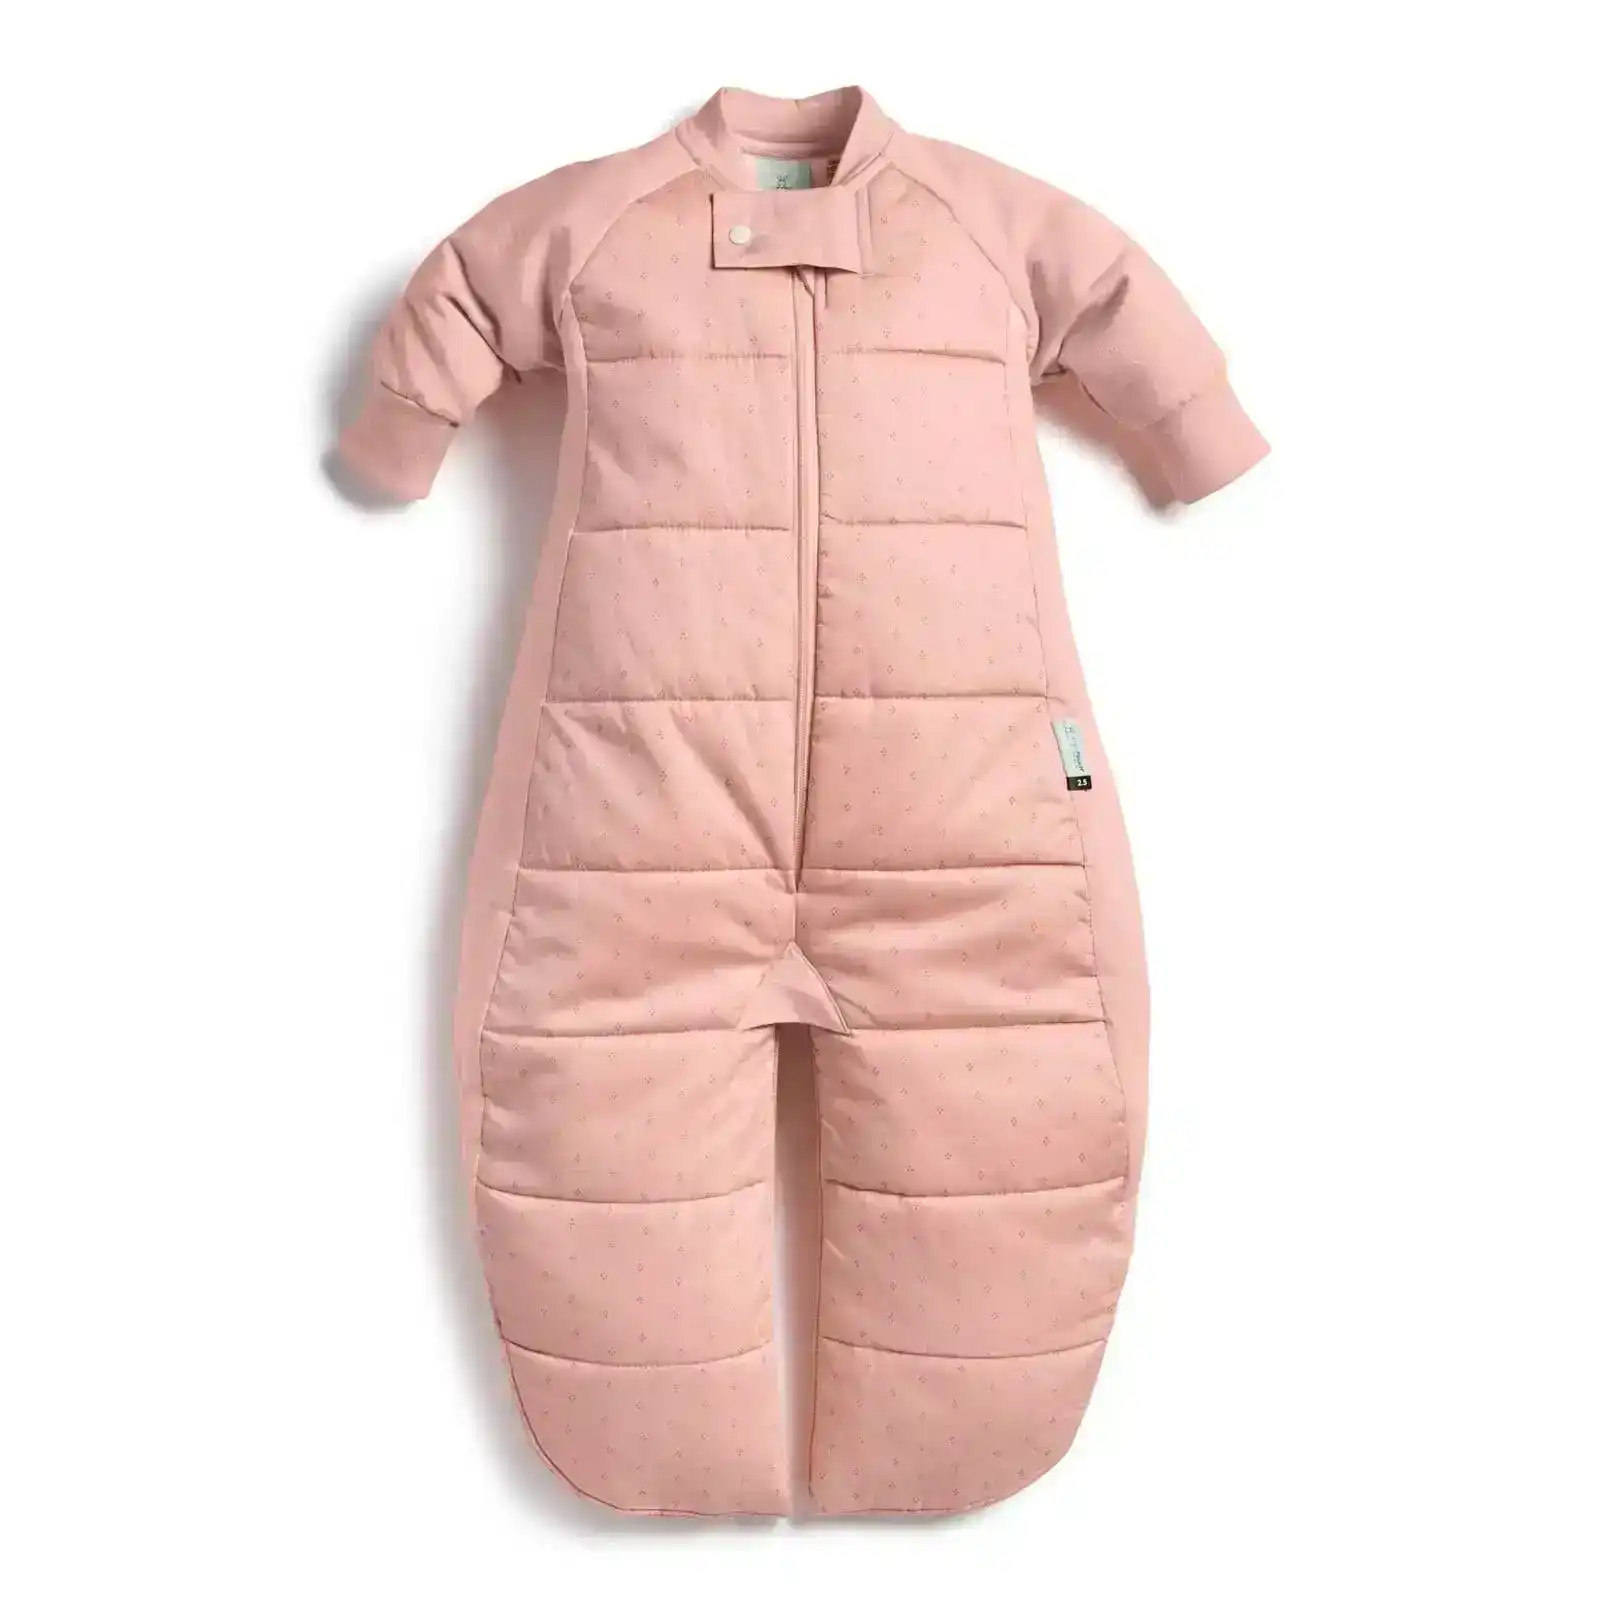 ergoPouch Organic/Cotton 3.5 TOG Sleep Suit Bag 8-24m for Baby/Toddler Berries